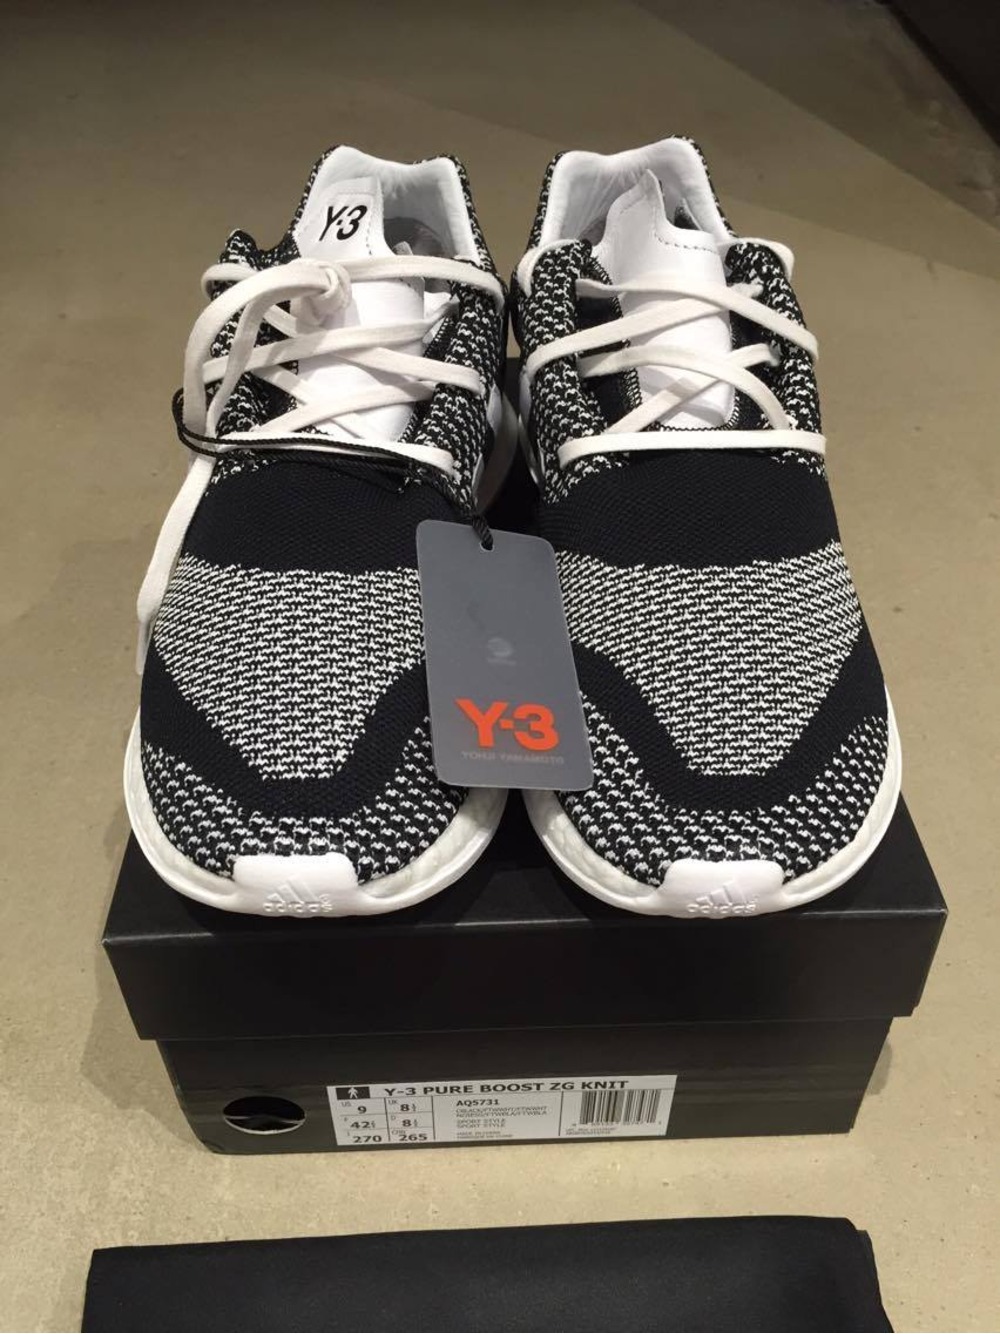 Used Ultraboost Kijiji in Ontario. Buy, Sell & Save with